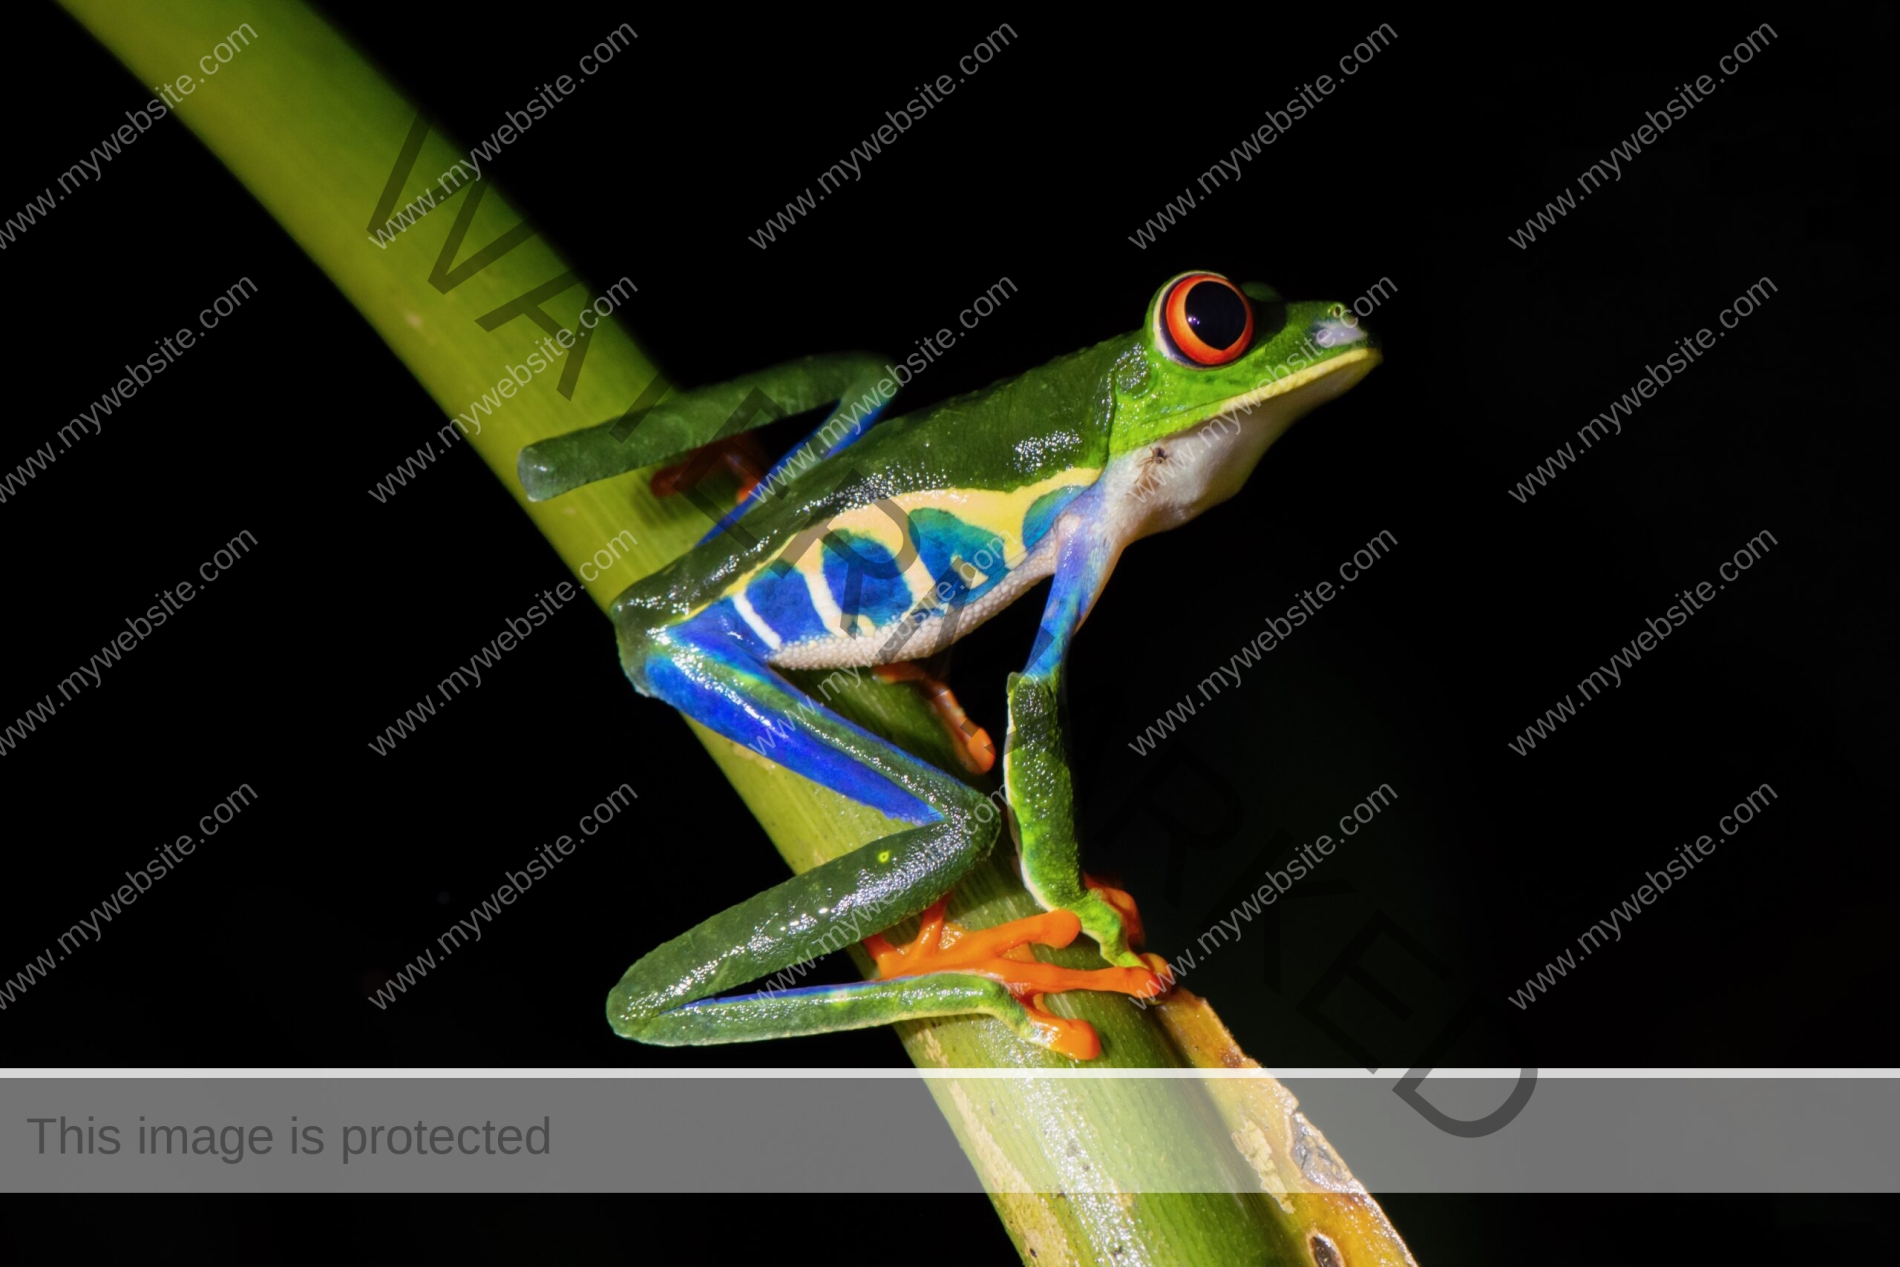 Caribbean Red-Eyed Tree Frog. Costa Rica